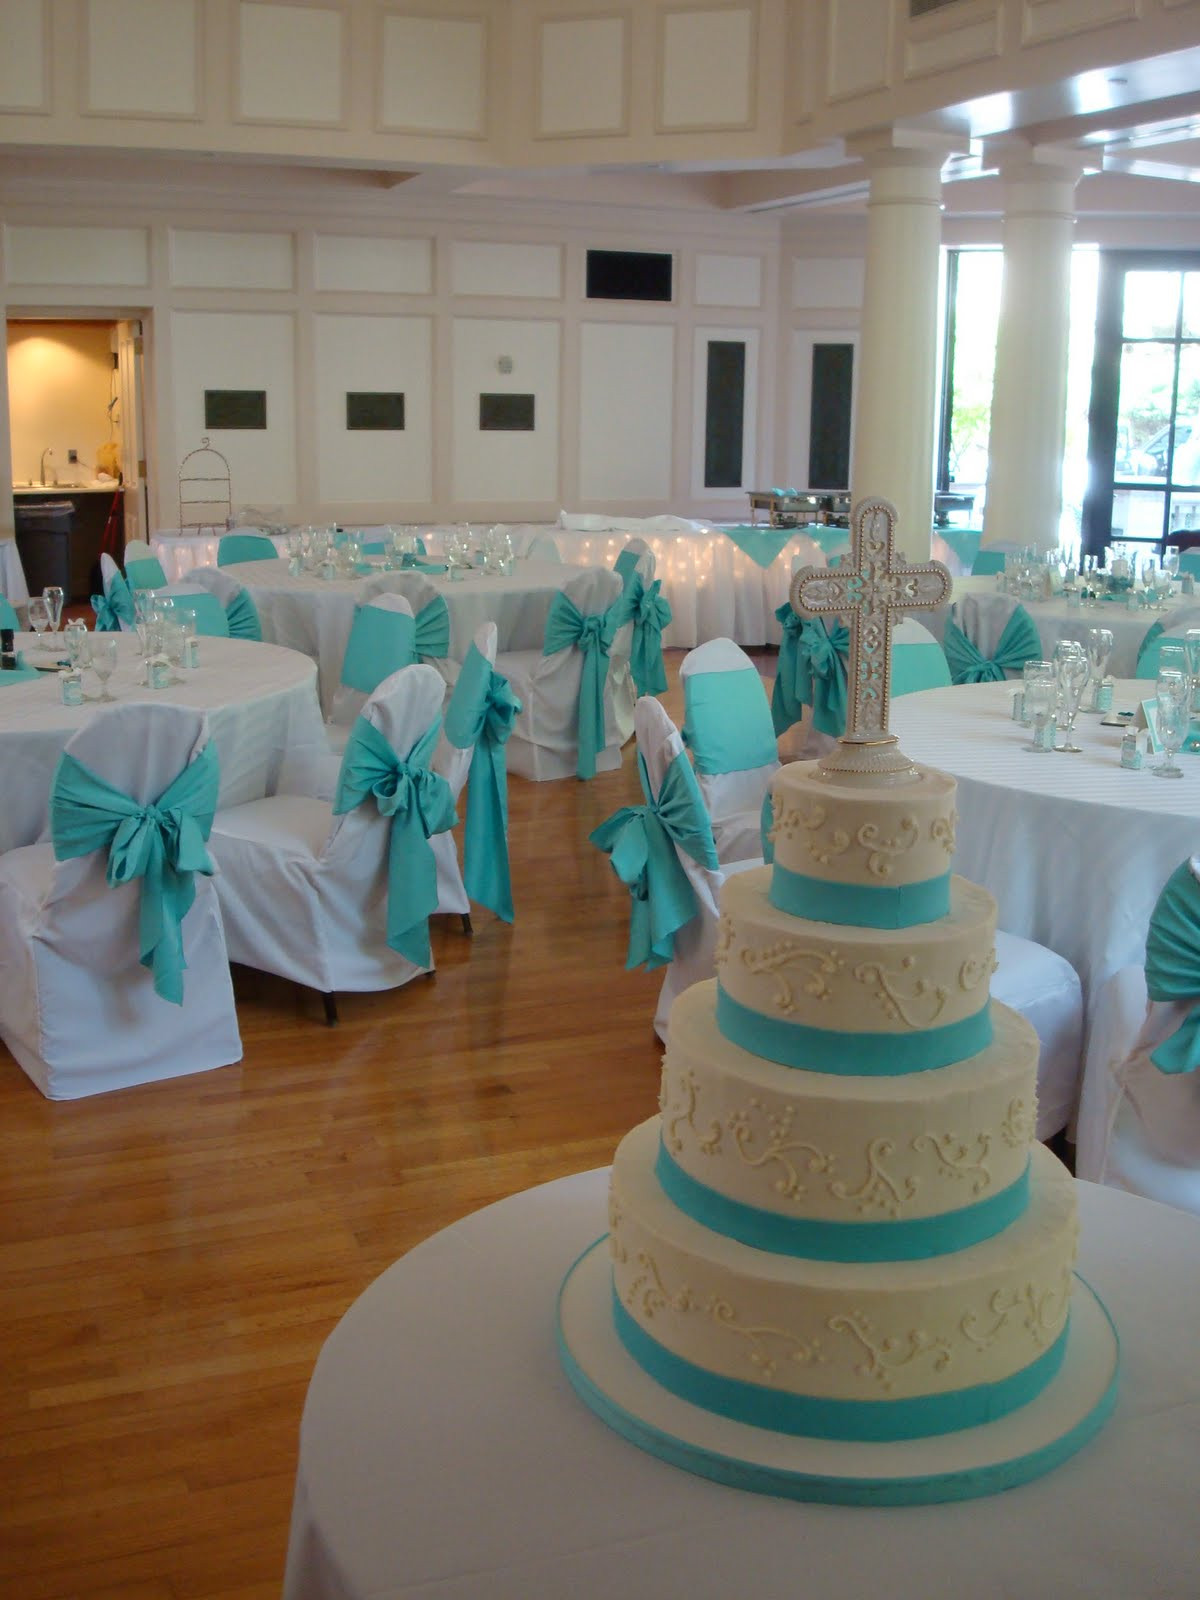 Teal Wedding Decorations
 Teal Wedding Inspiration Themes Designer Chair Covers To Go